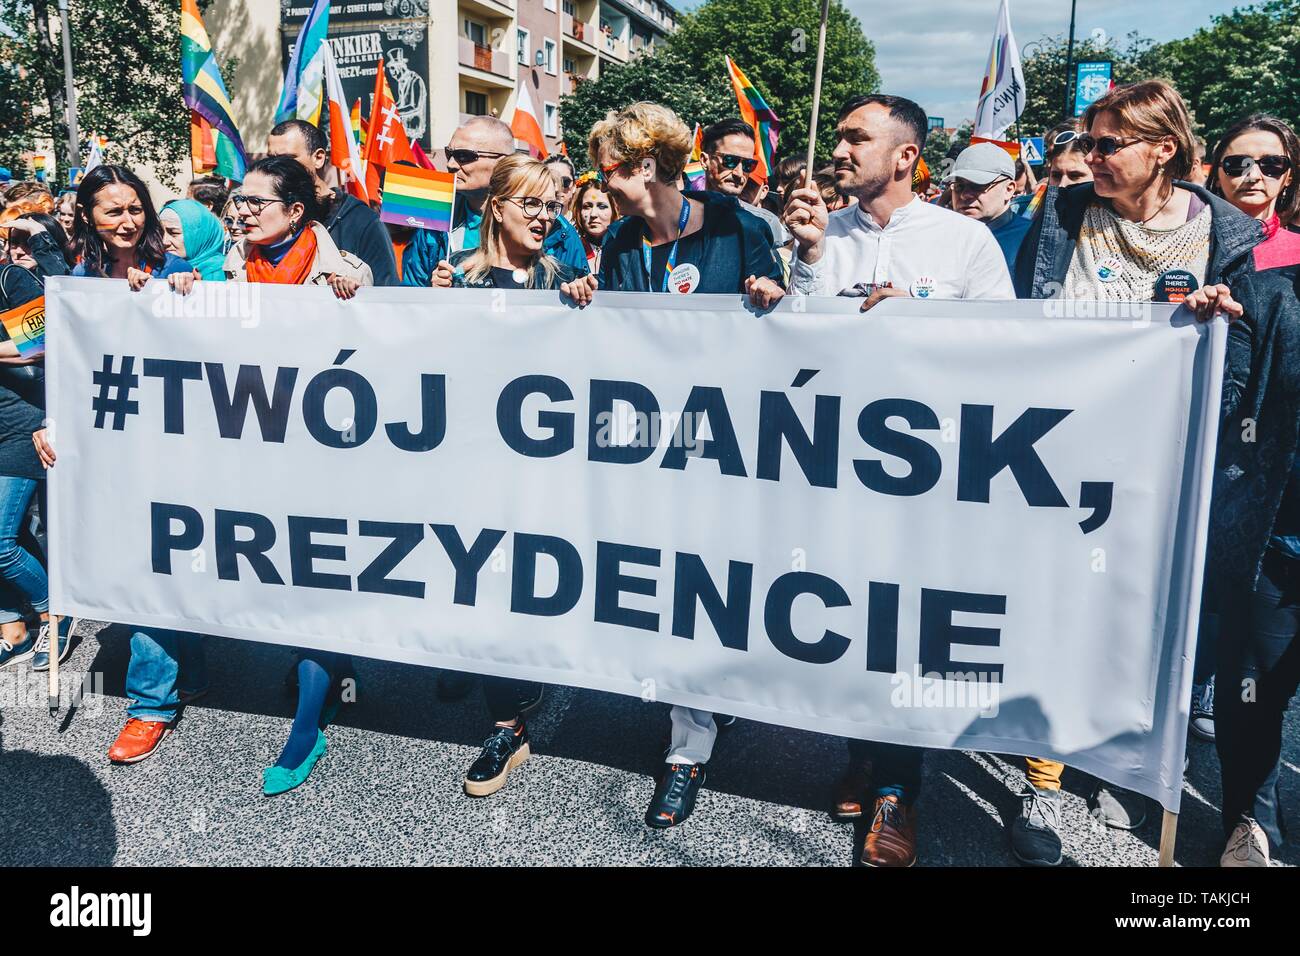 The 5th Tricity Equality March – Love can only combine, strolls through the streets on May 25, 2019 in Gdansk, Poland.   The banner reads: #Your Gdans Stock Photo